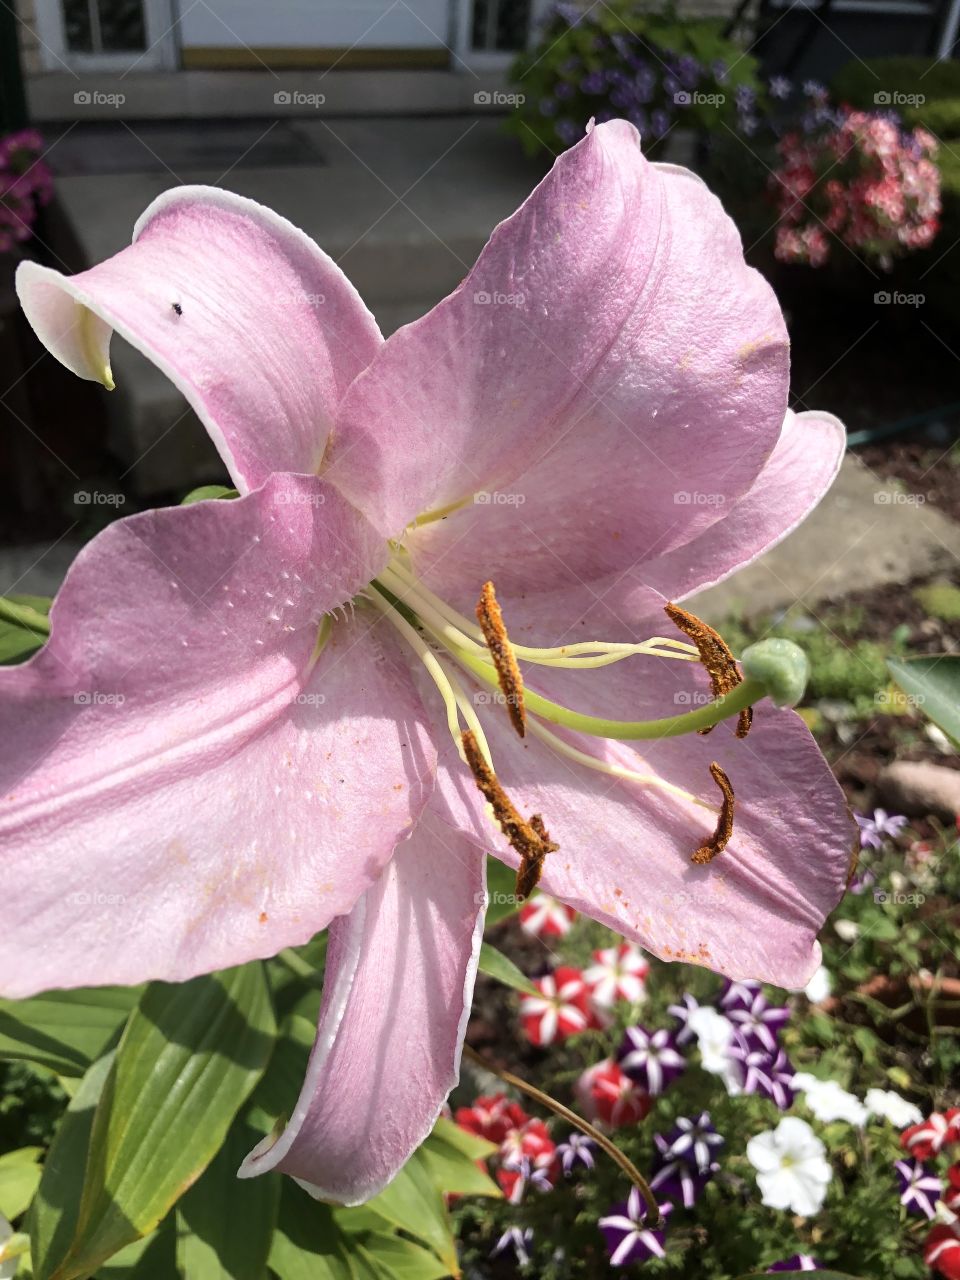 Mad dog and Englishmen in the midday sun, and lilies. A fresh just past full bloom pretty in pink lily.